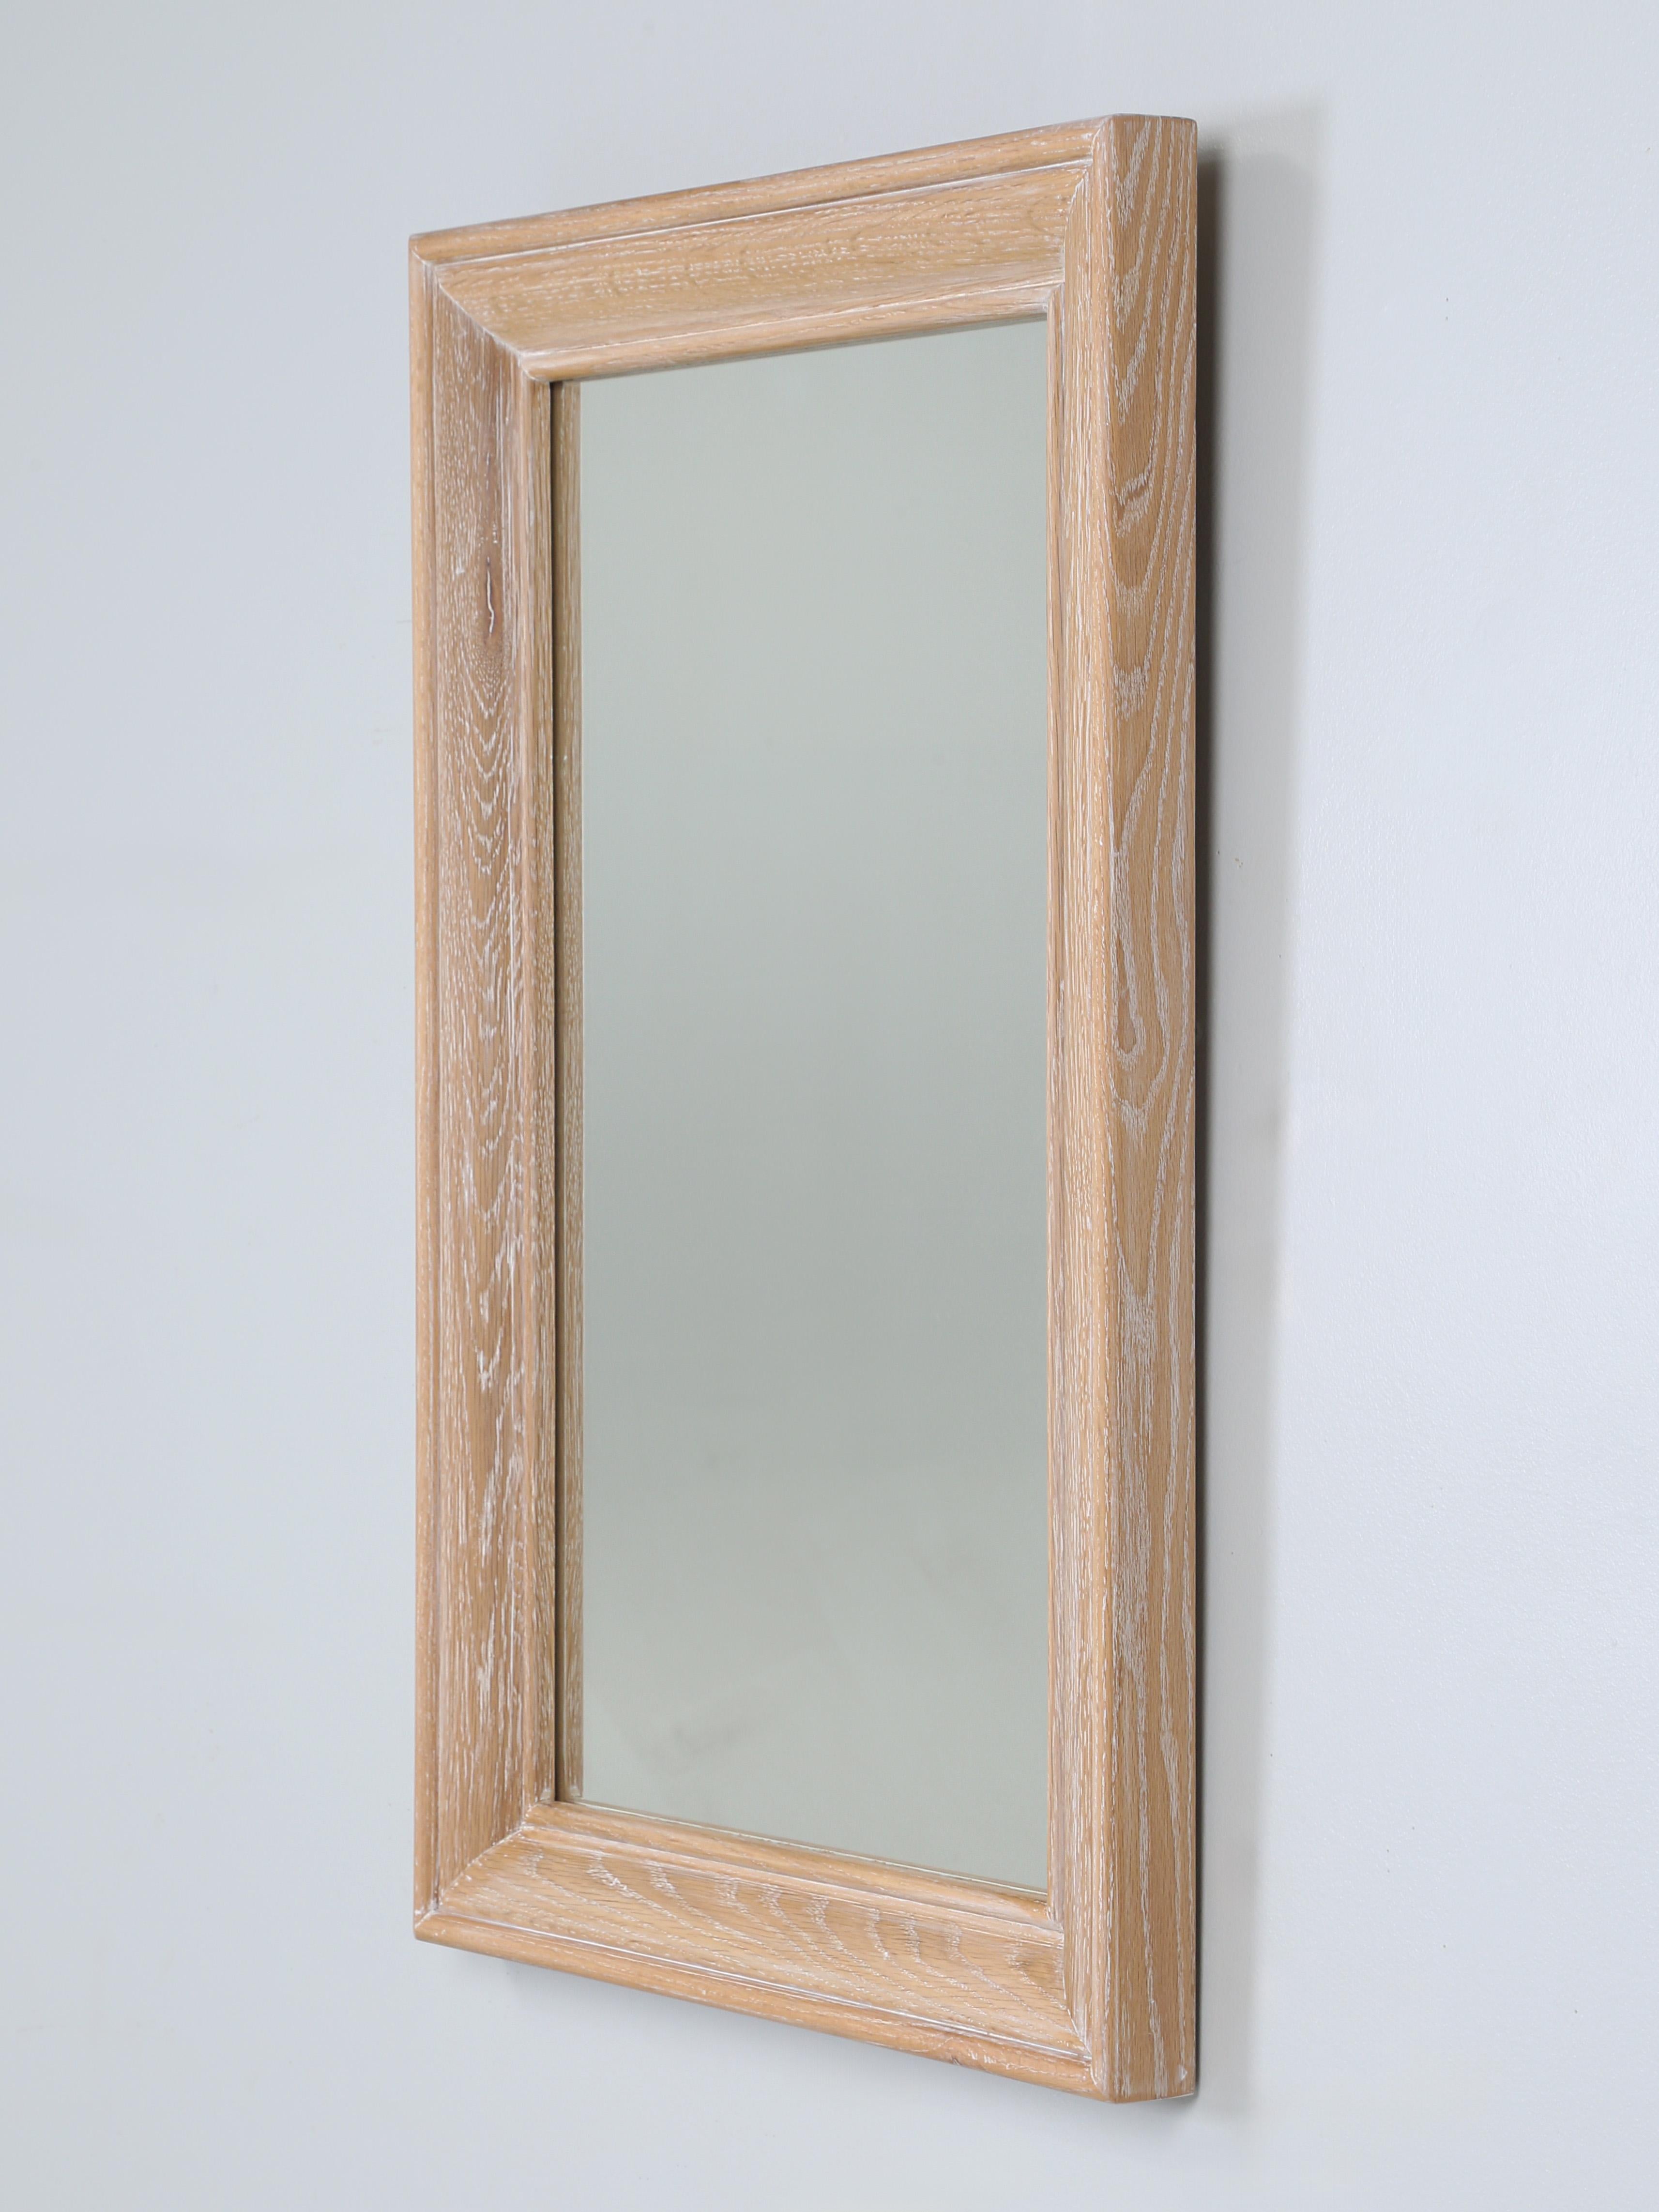 Custom Hand-Made White Oak Mirror by Old Plank in a Cerused Finish. Our Oak Wall Mounted Mirrors are made in our workshop to your specific dimensions and finish. The hand-made white oak Mirror frames are extremely heavy and need to be properly